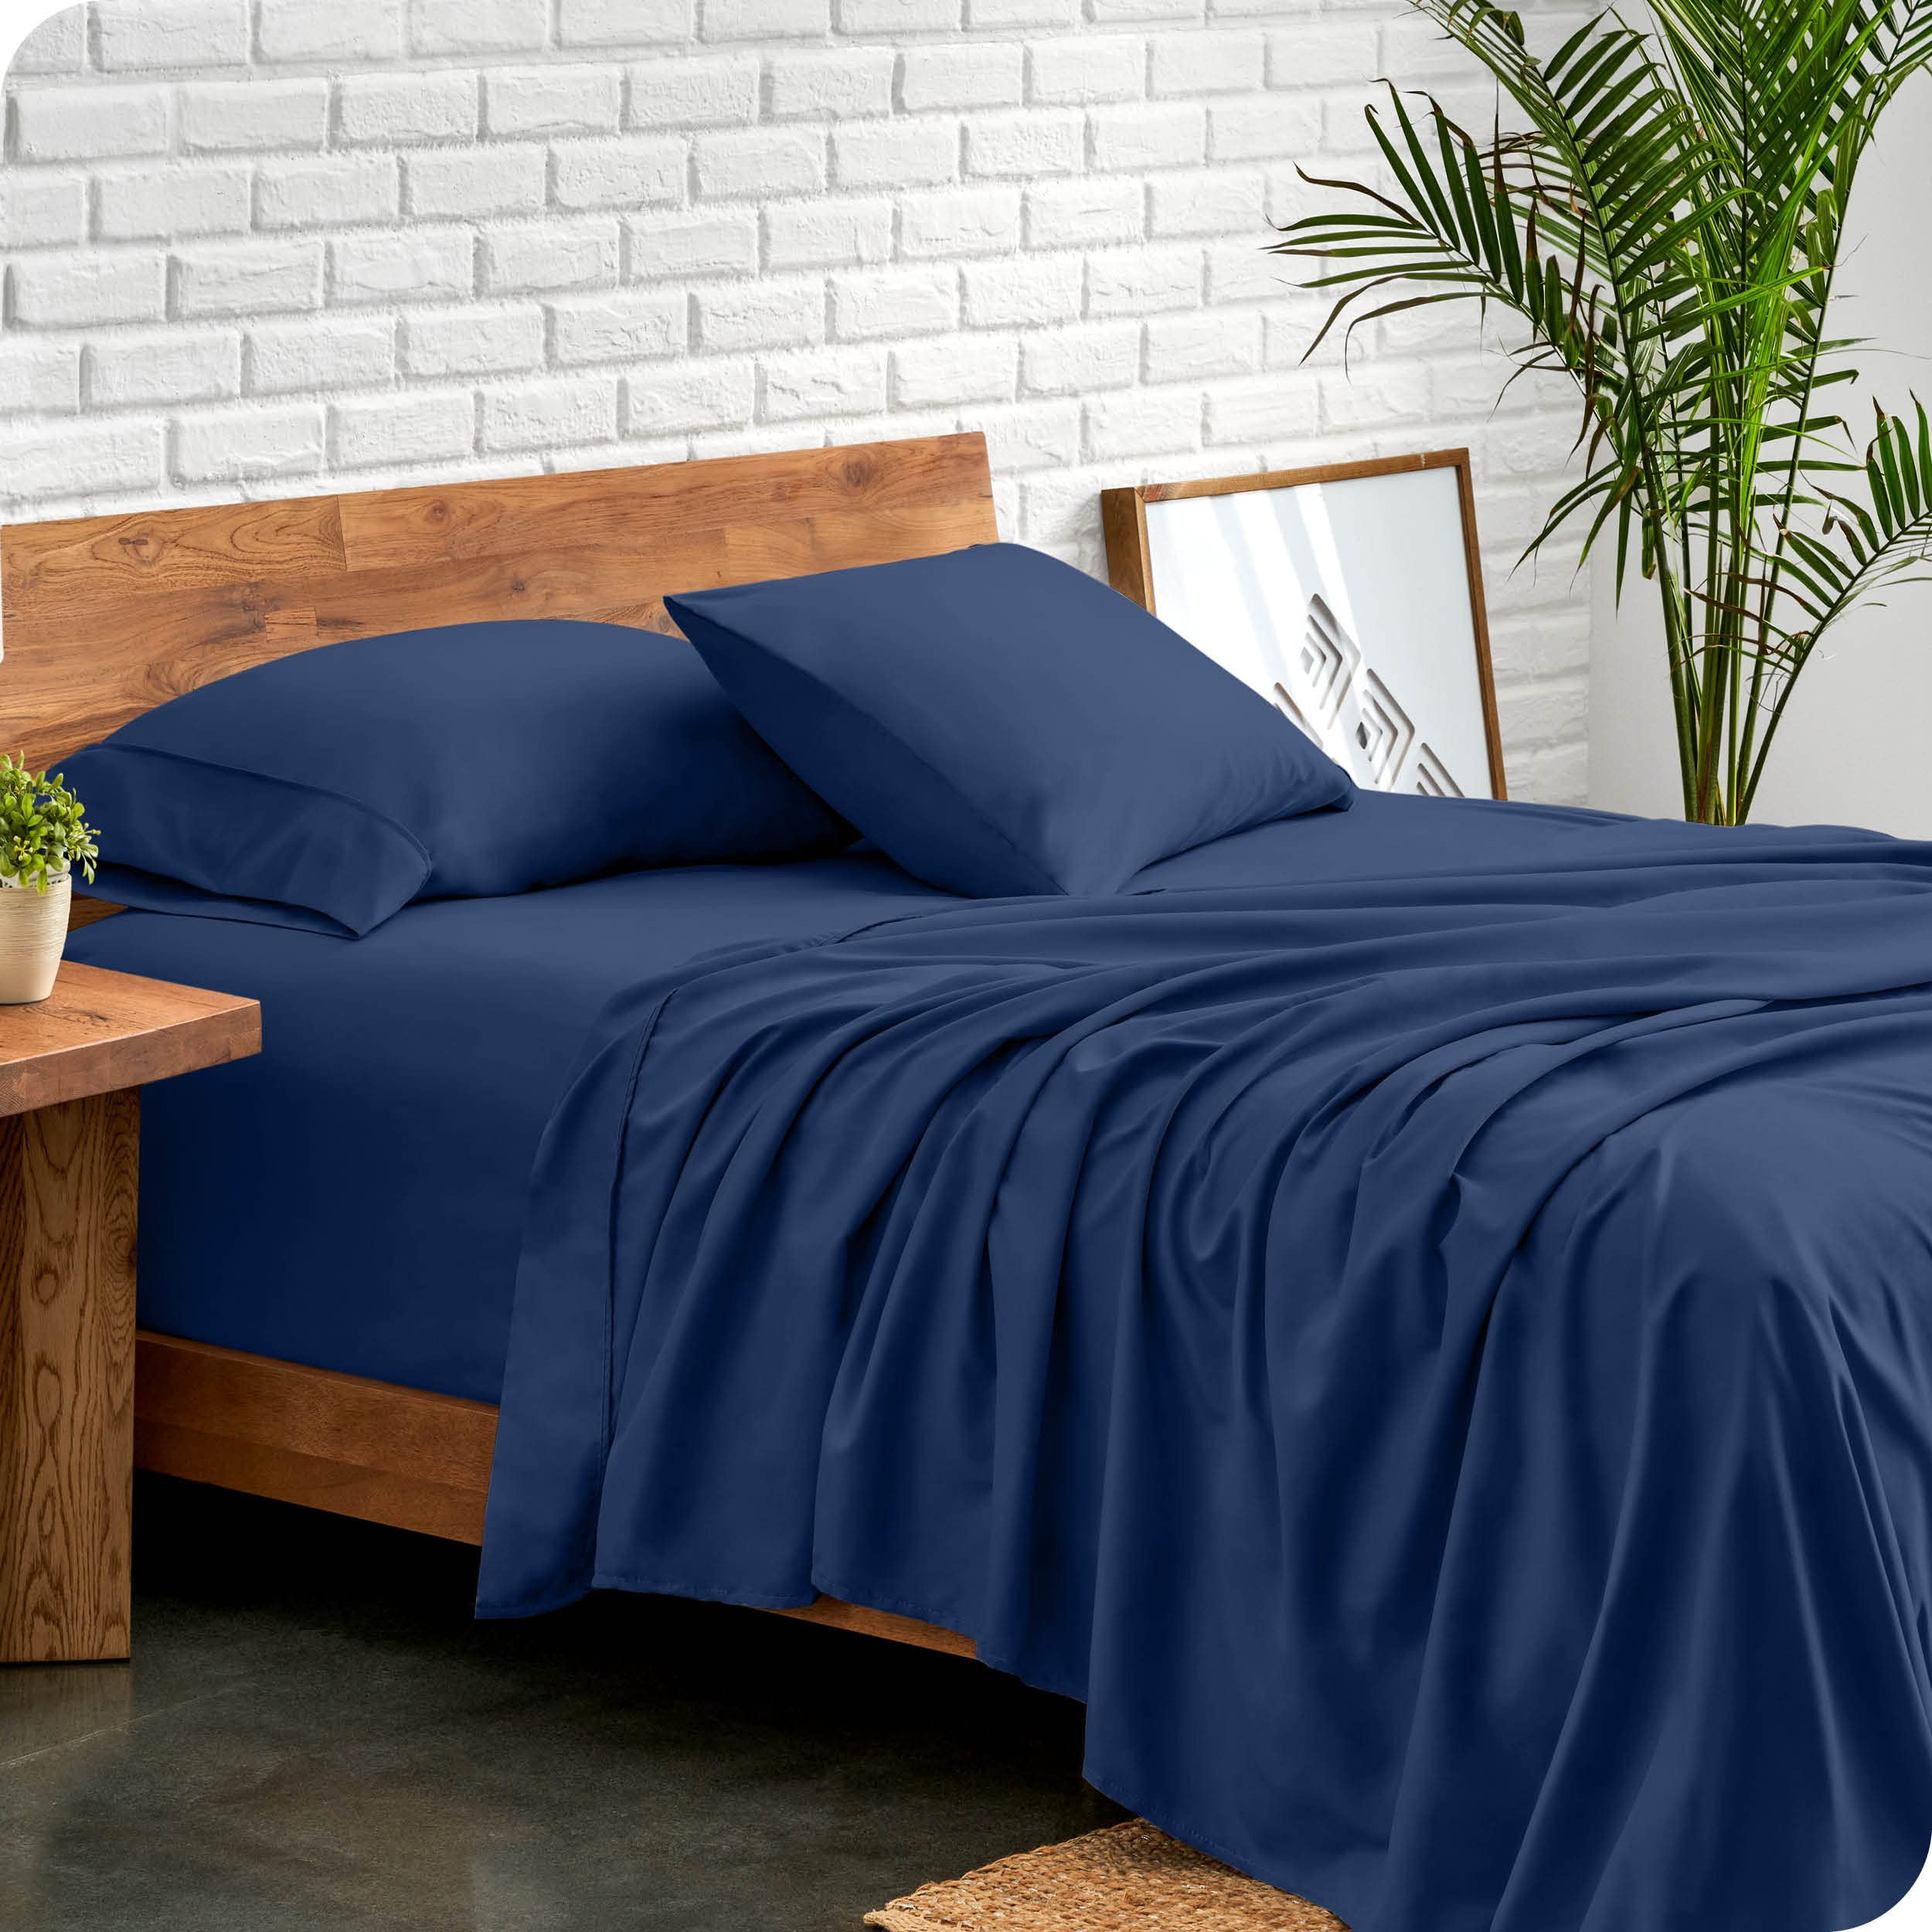 Book Cover Bare Home Twin Sheet Set - 1800 Ultra-Soft Microfiber Twin Bed Sheets - Double Brushed - Deep Pockets - Easy Fit - Extra Soft - 3 Piece Set - Bedding Sheets & Pillowcases (Twin, Dark Blue) Twin 12 - Dark Blue